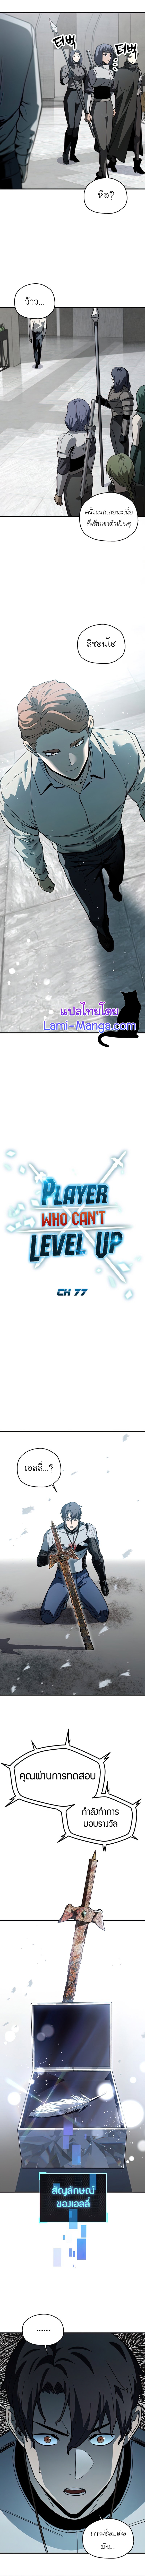 Player-Who-Cant-Level-Up--77-02.jpg